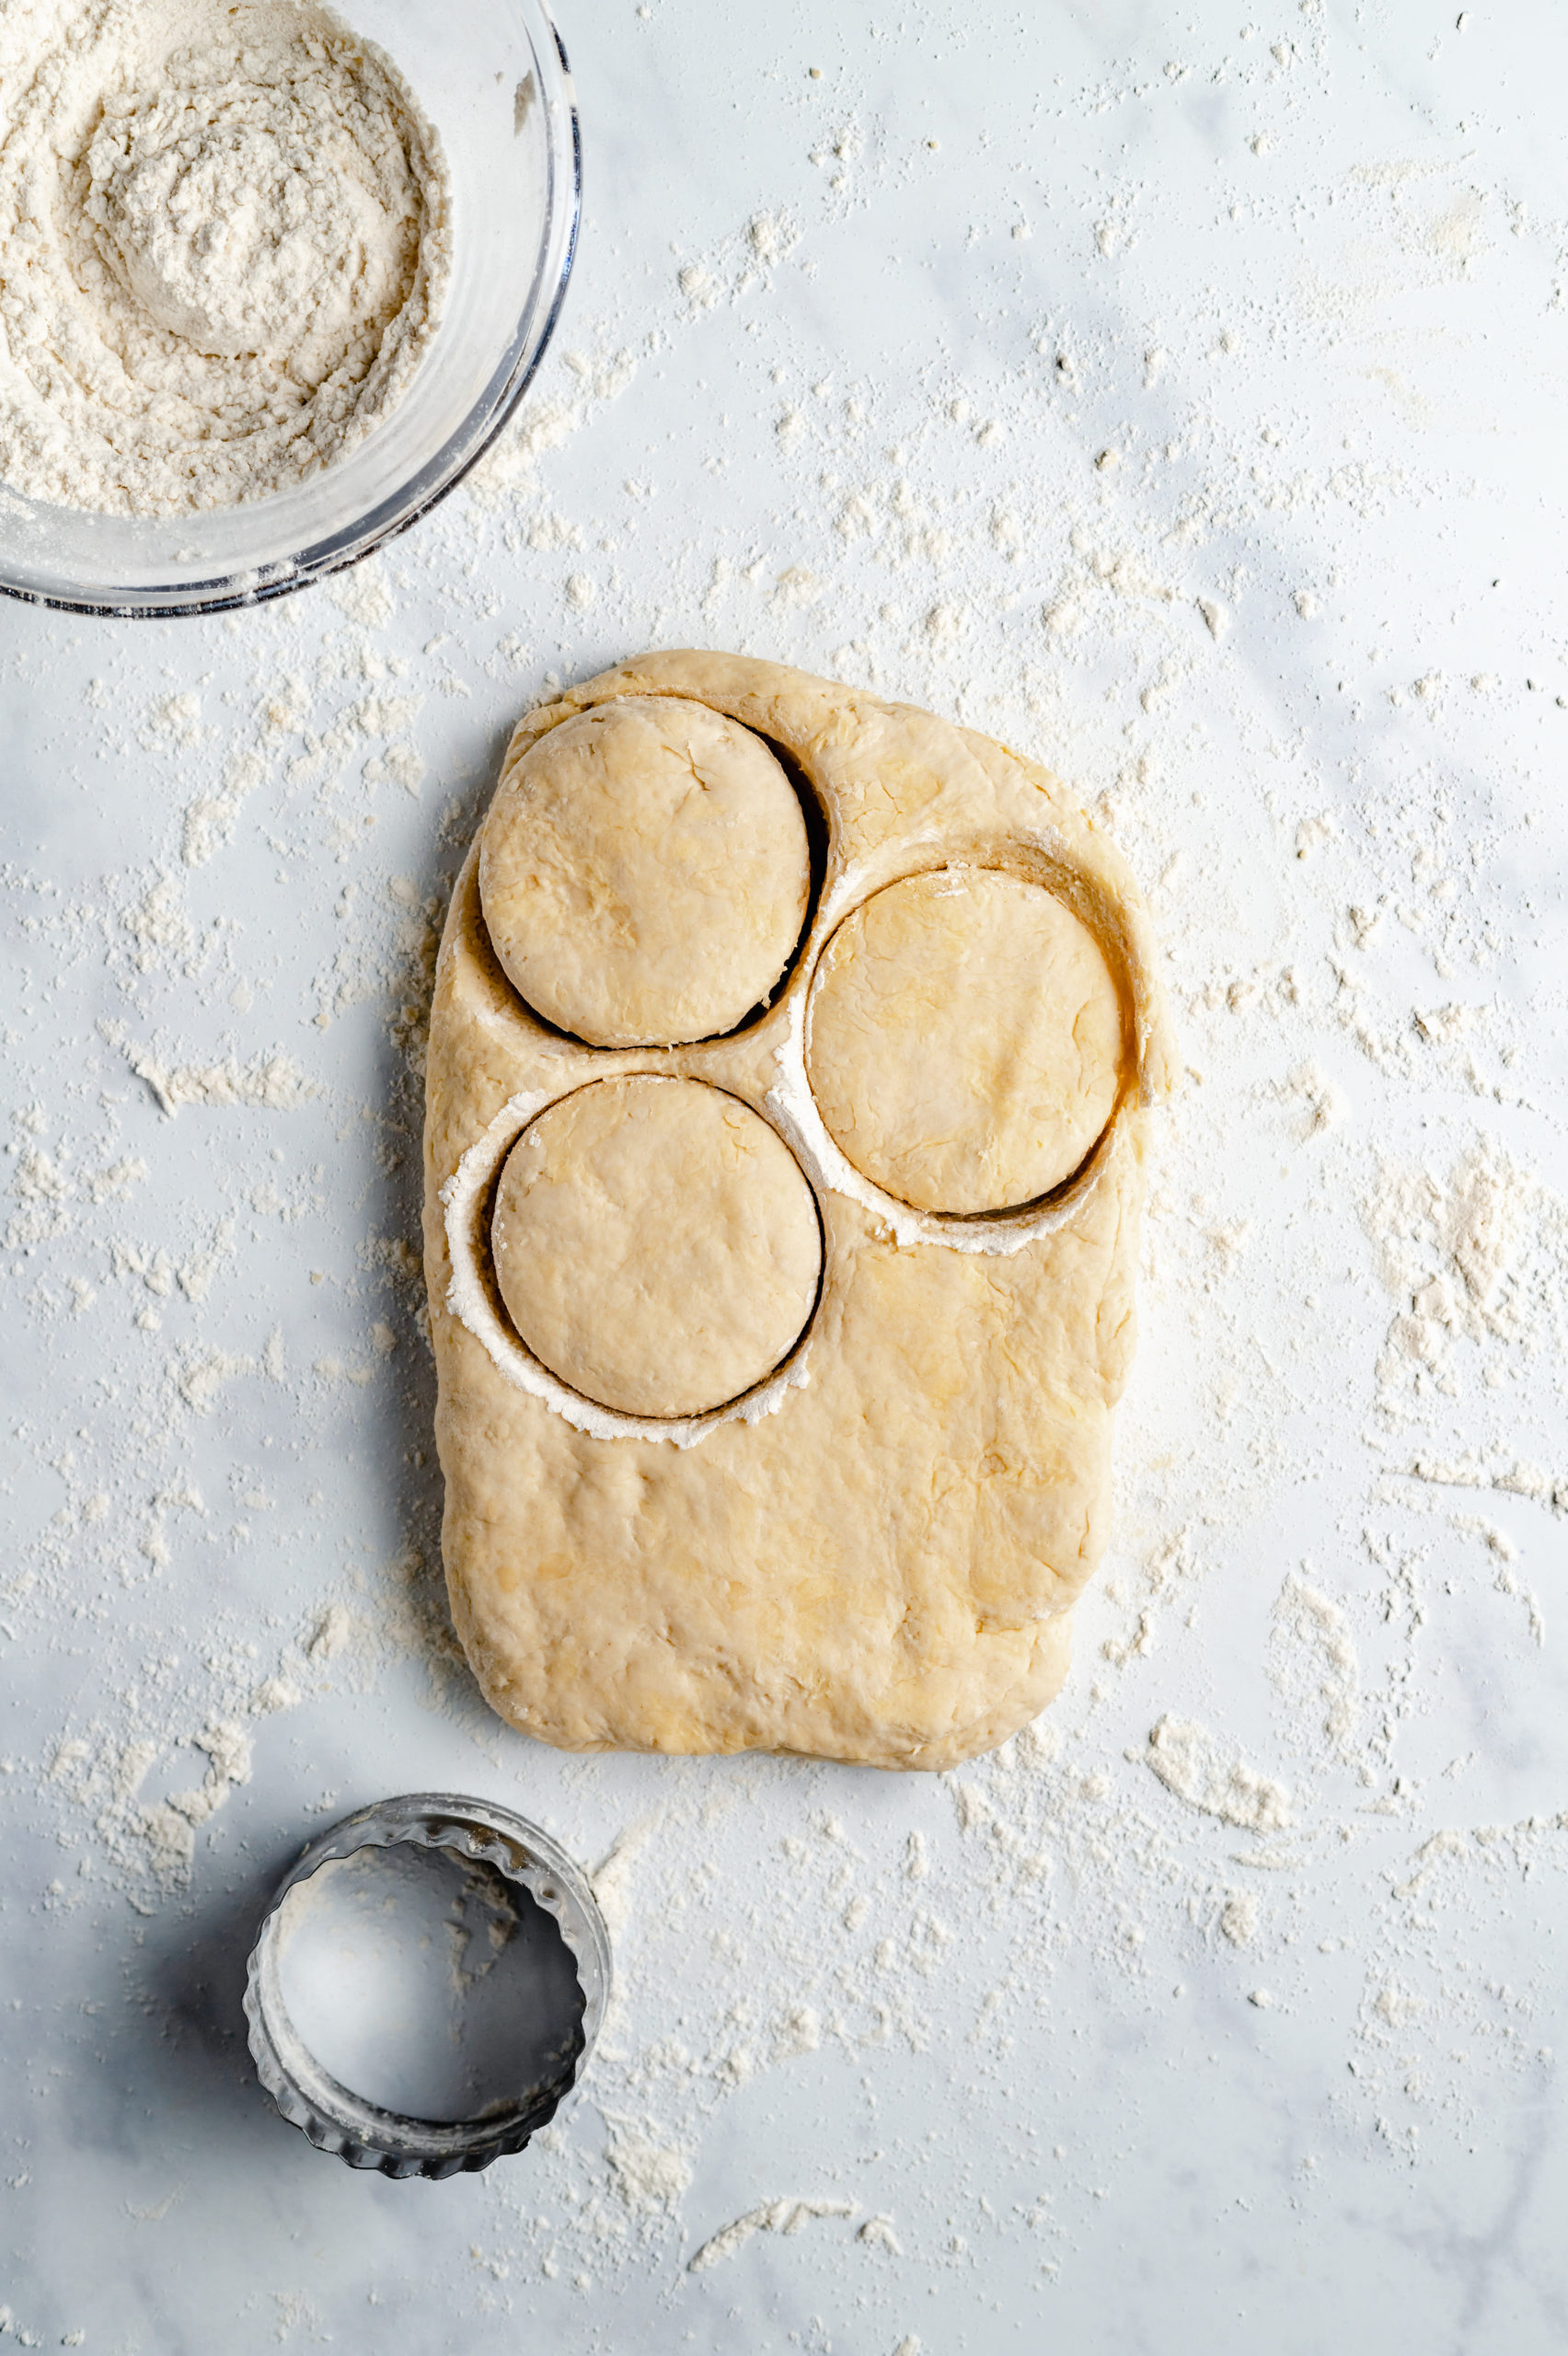 Vegan Biscuit Dough on a Floured Surface with Three Biscuits Cut Out